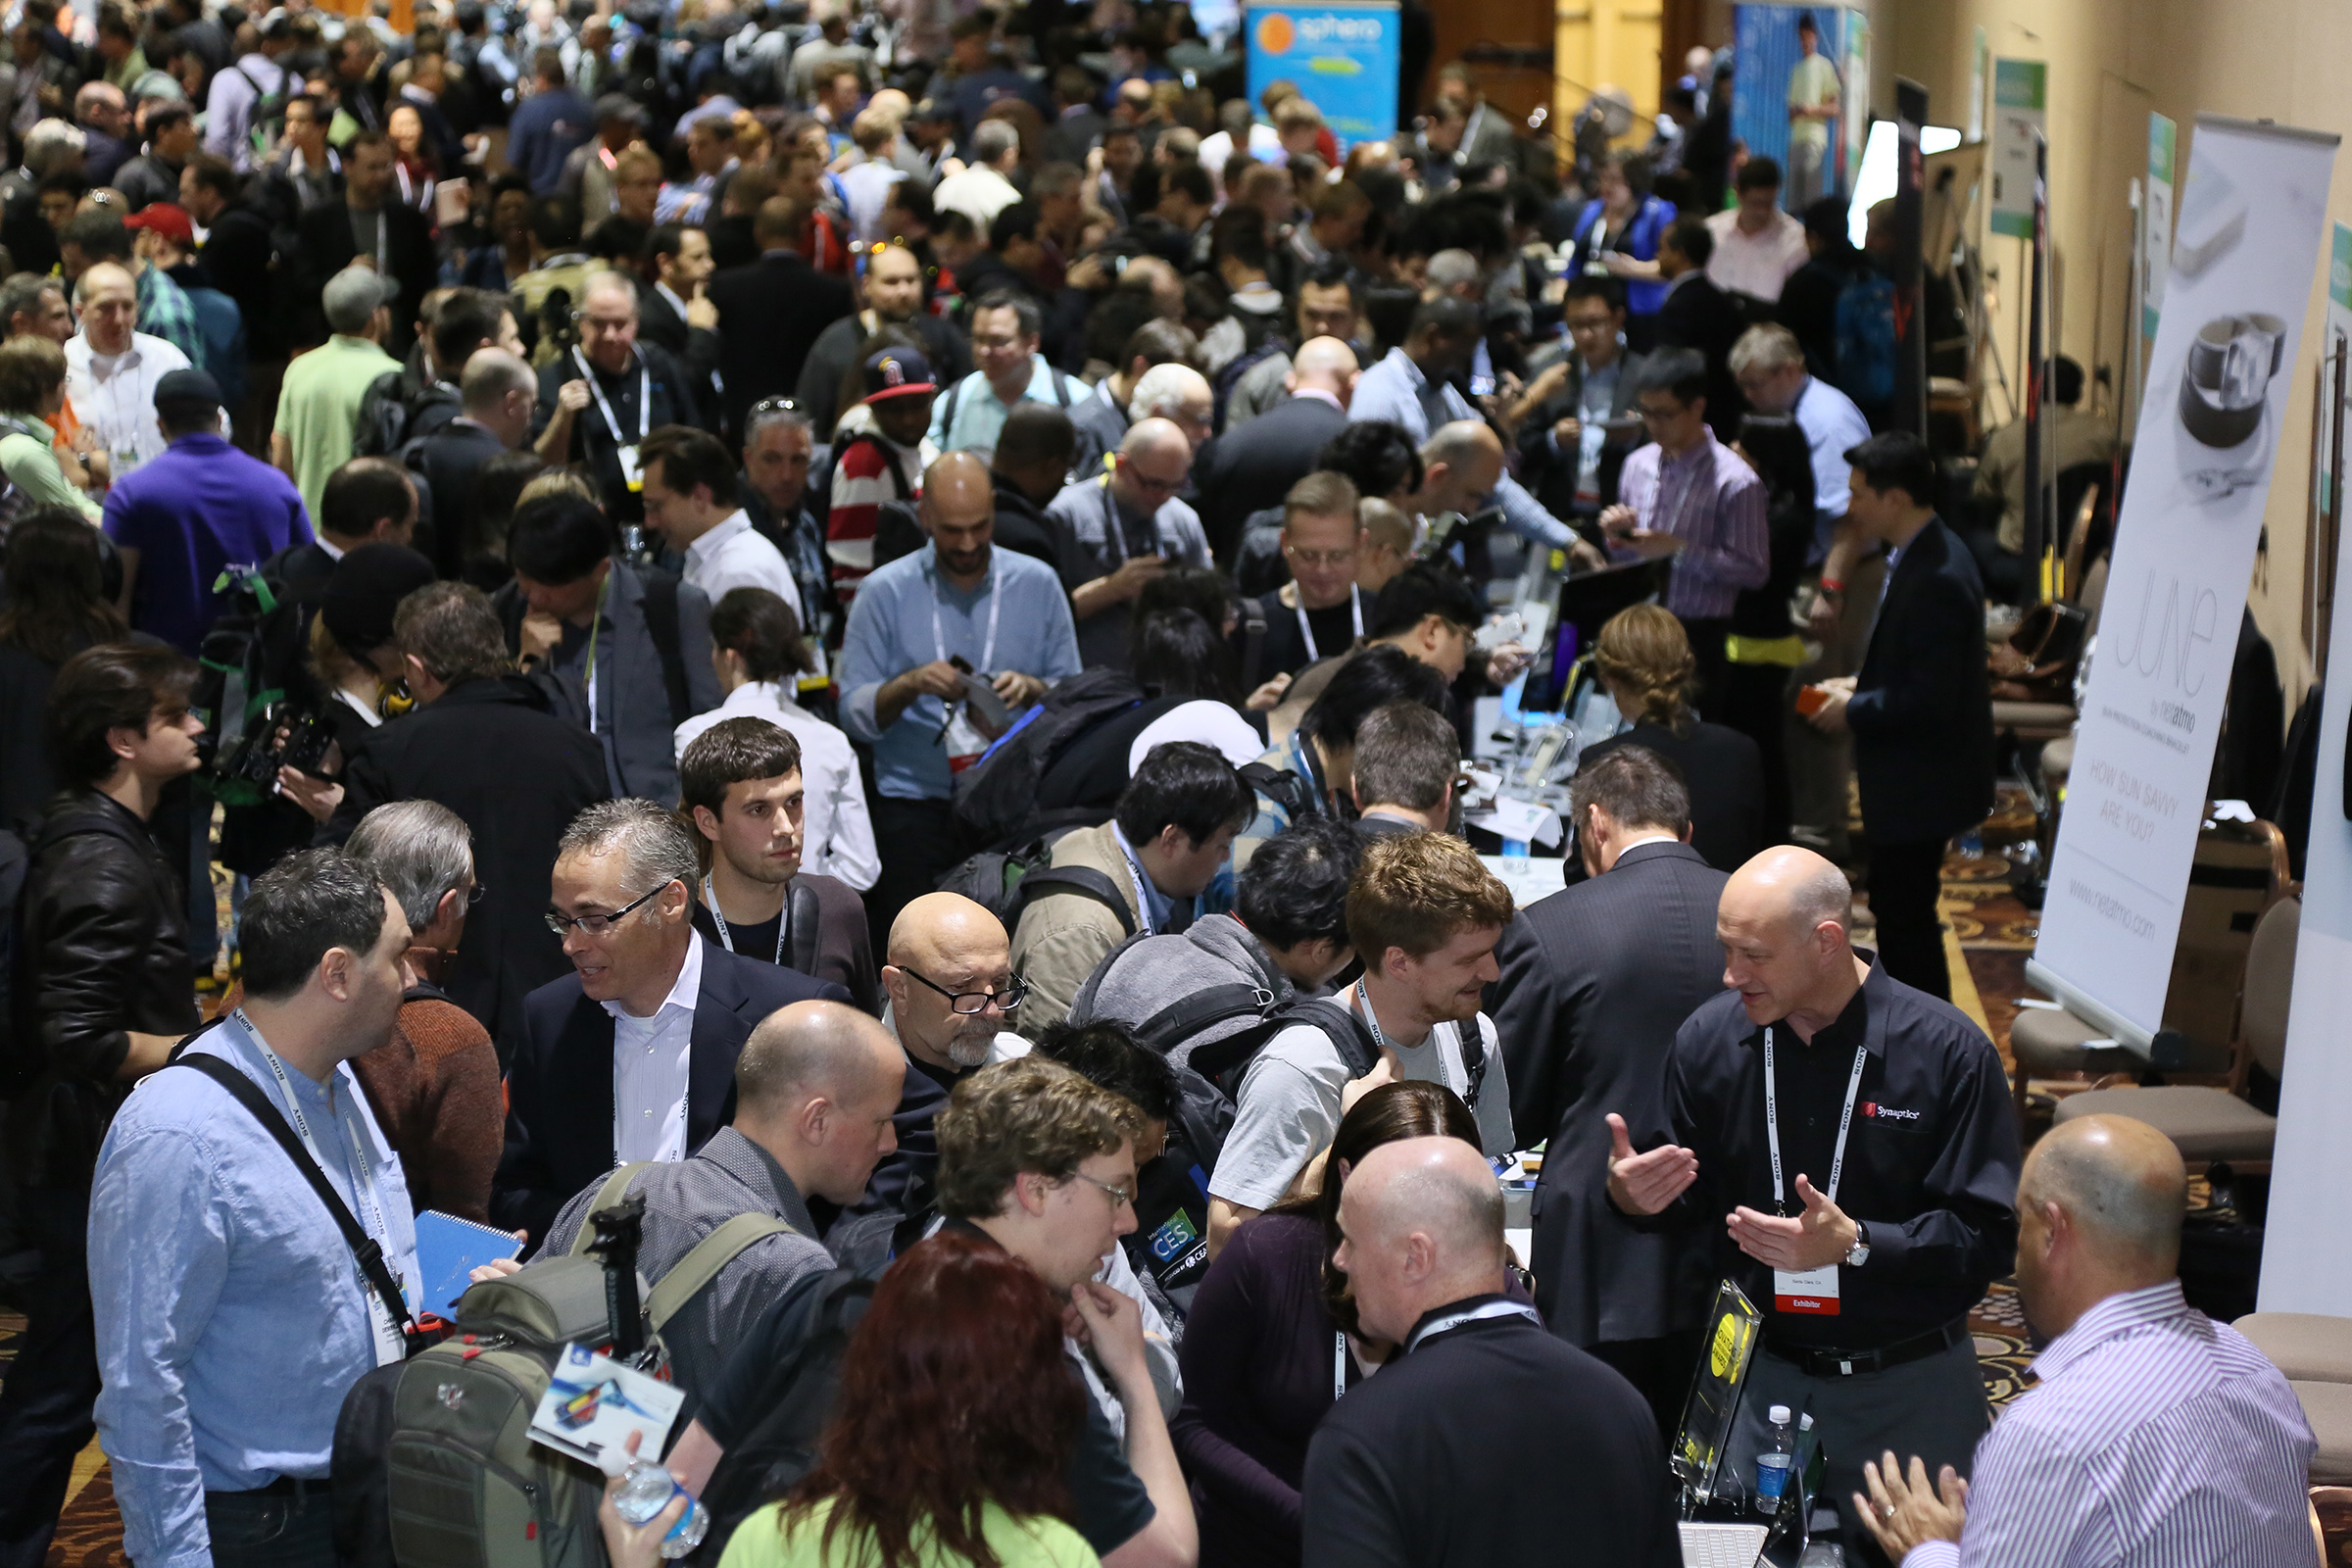 Crowds visit booths at the 2015 International Consumer Electronic Show.